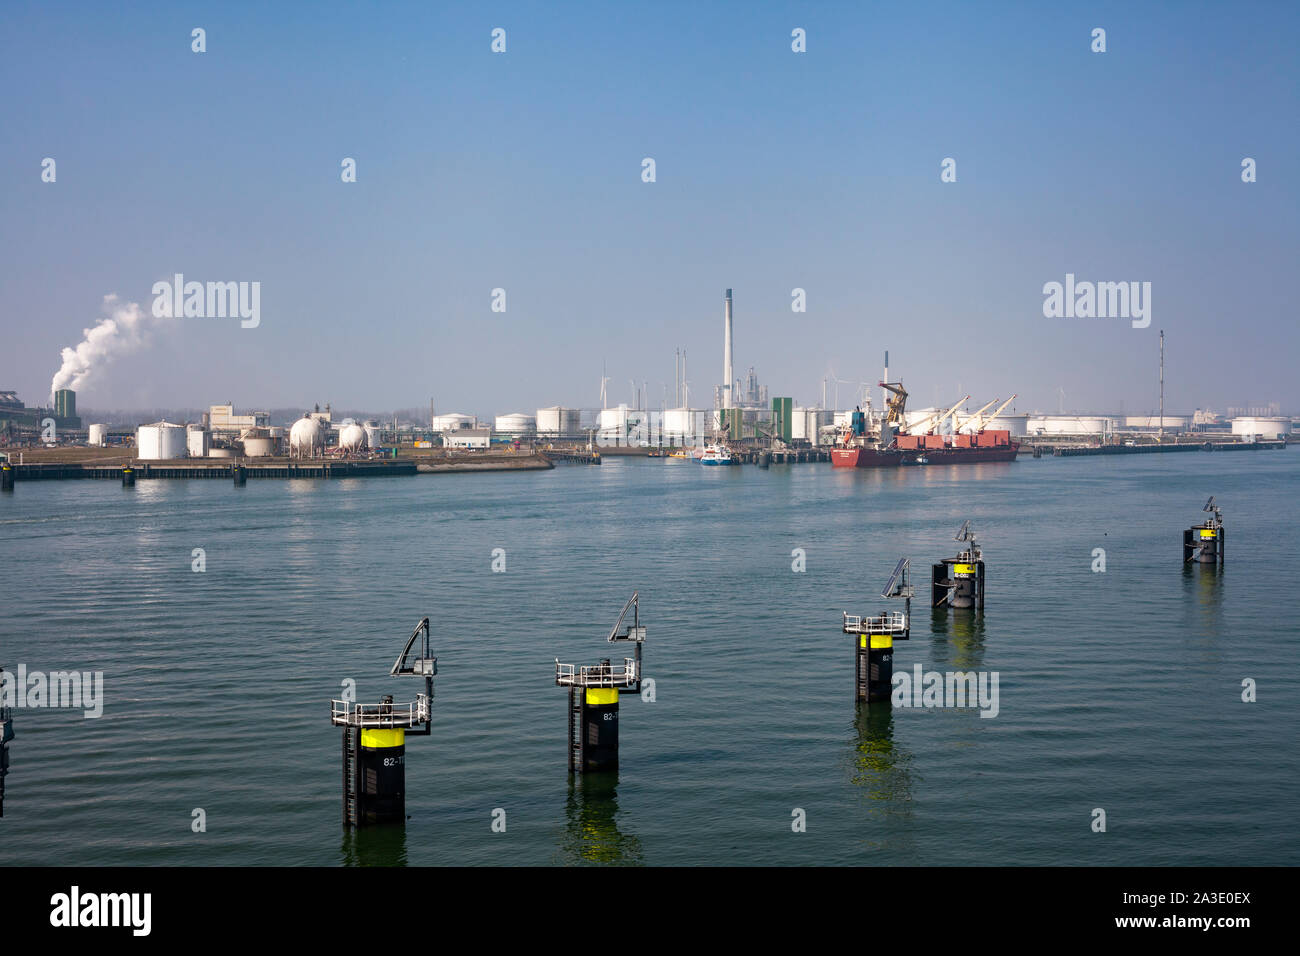 Berth - a place near the shore for mooring a vessel or boats in the Port of Rotterdam Stock Photo